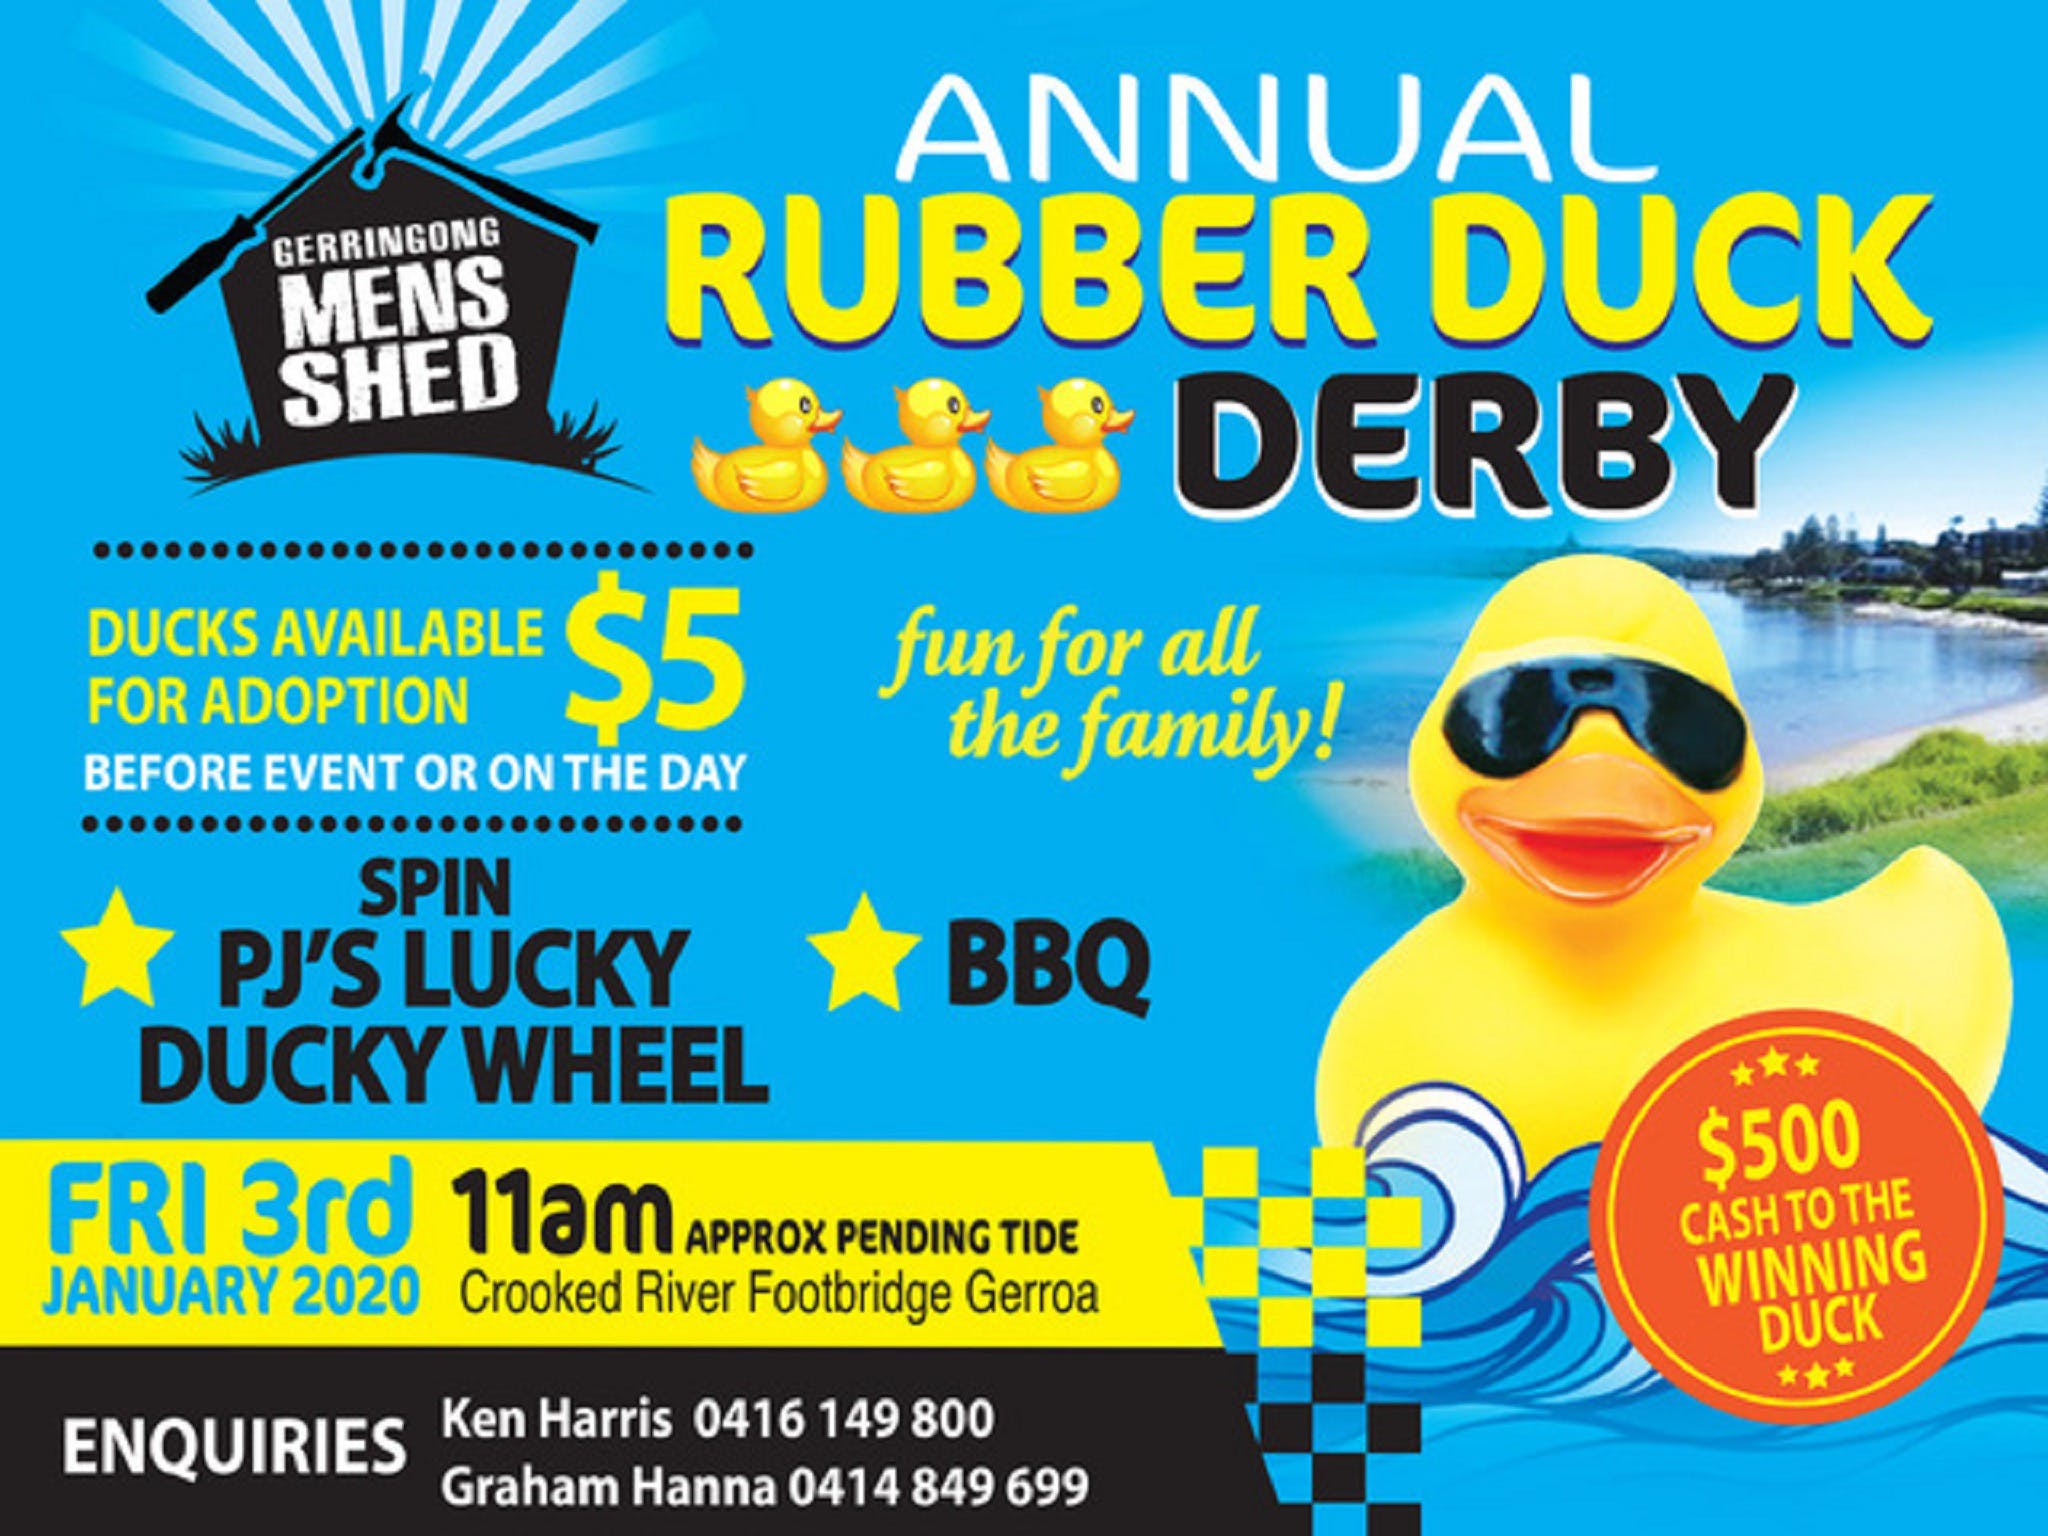 Gerringong Mens Shed Annual Duck Derby - Taree Accommodation